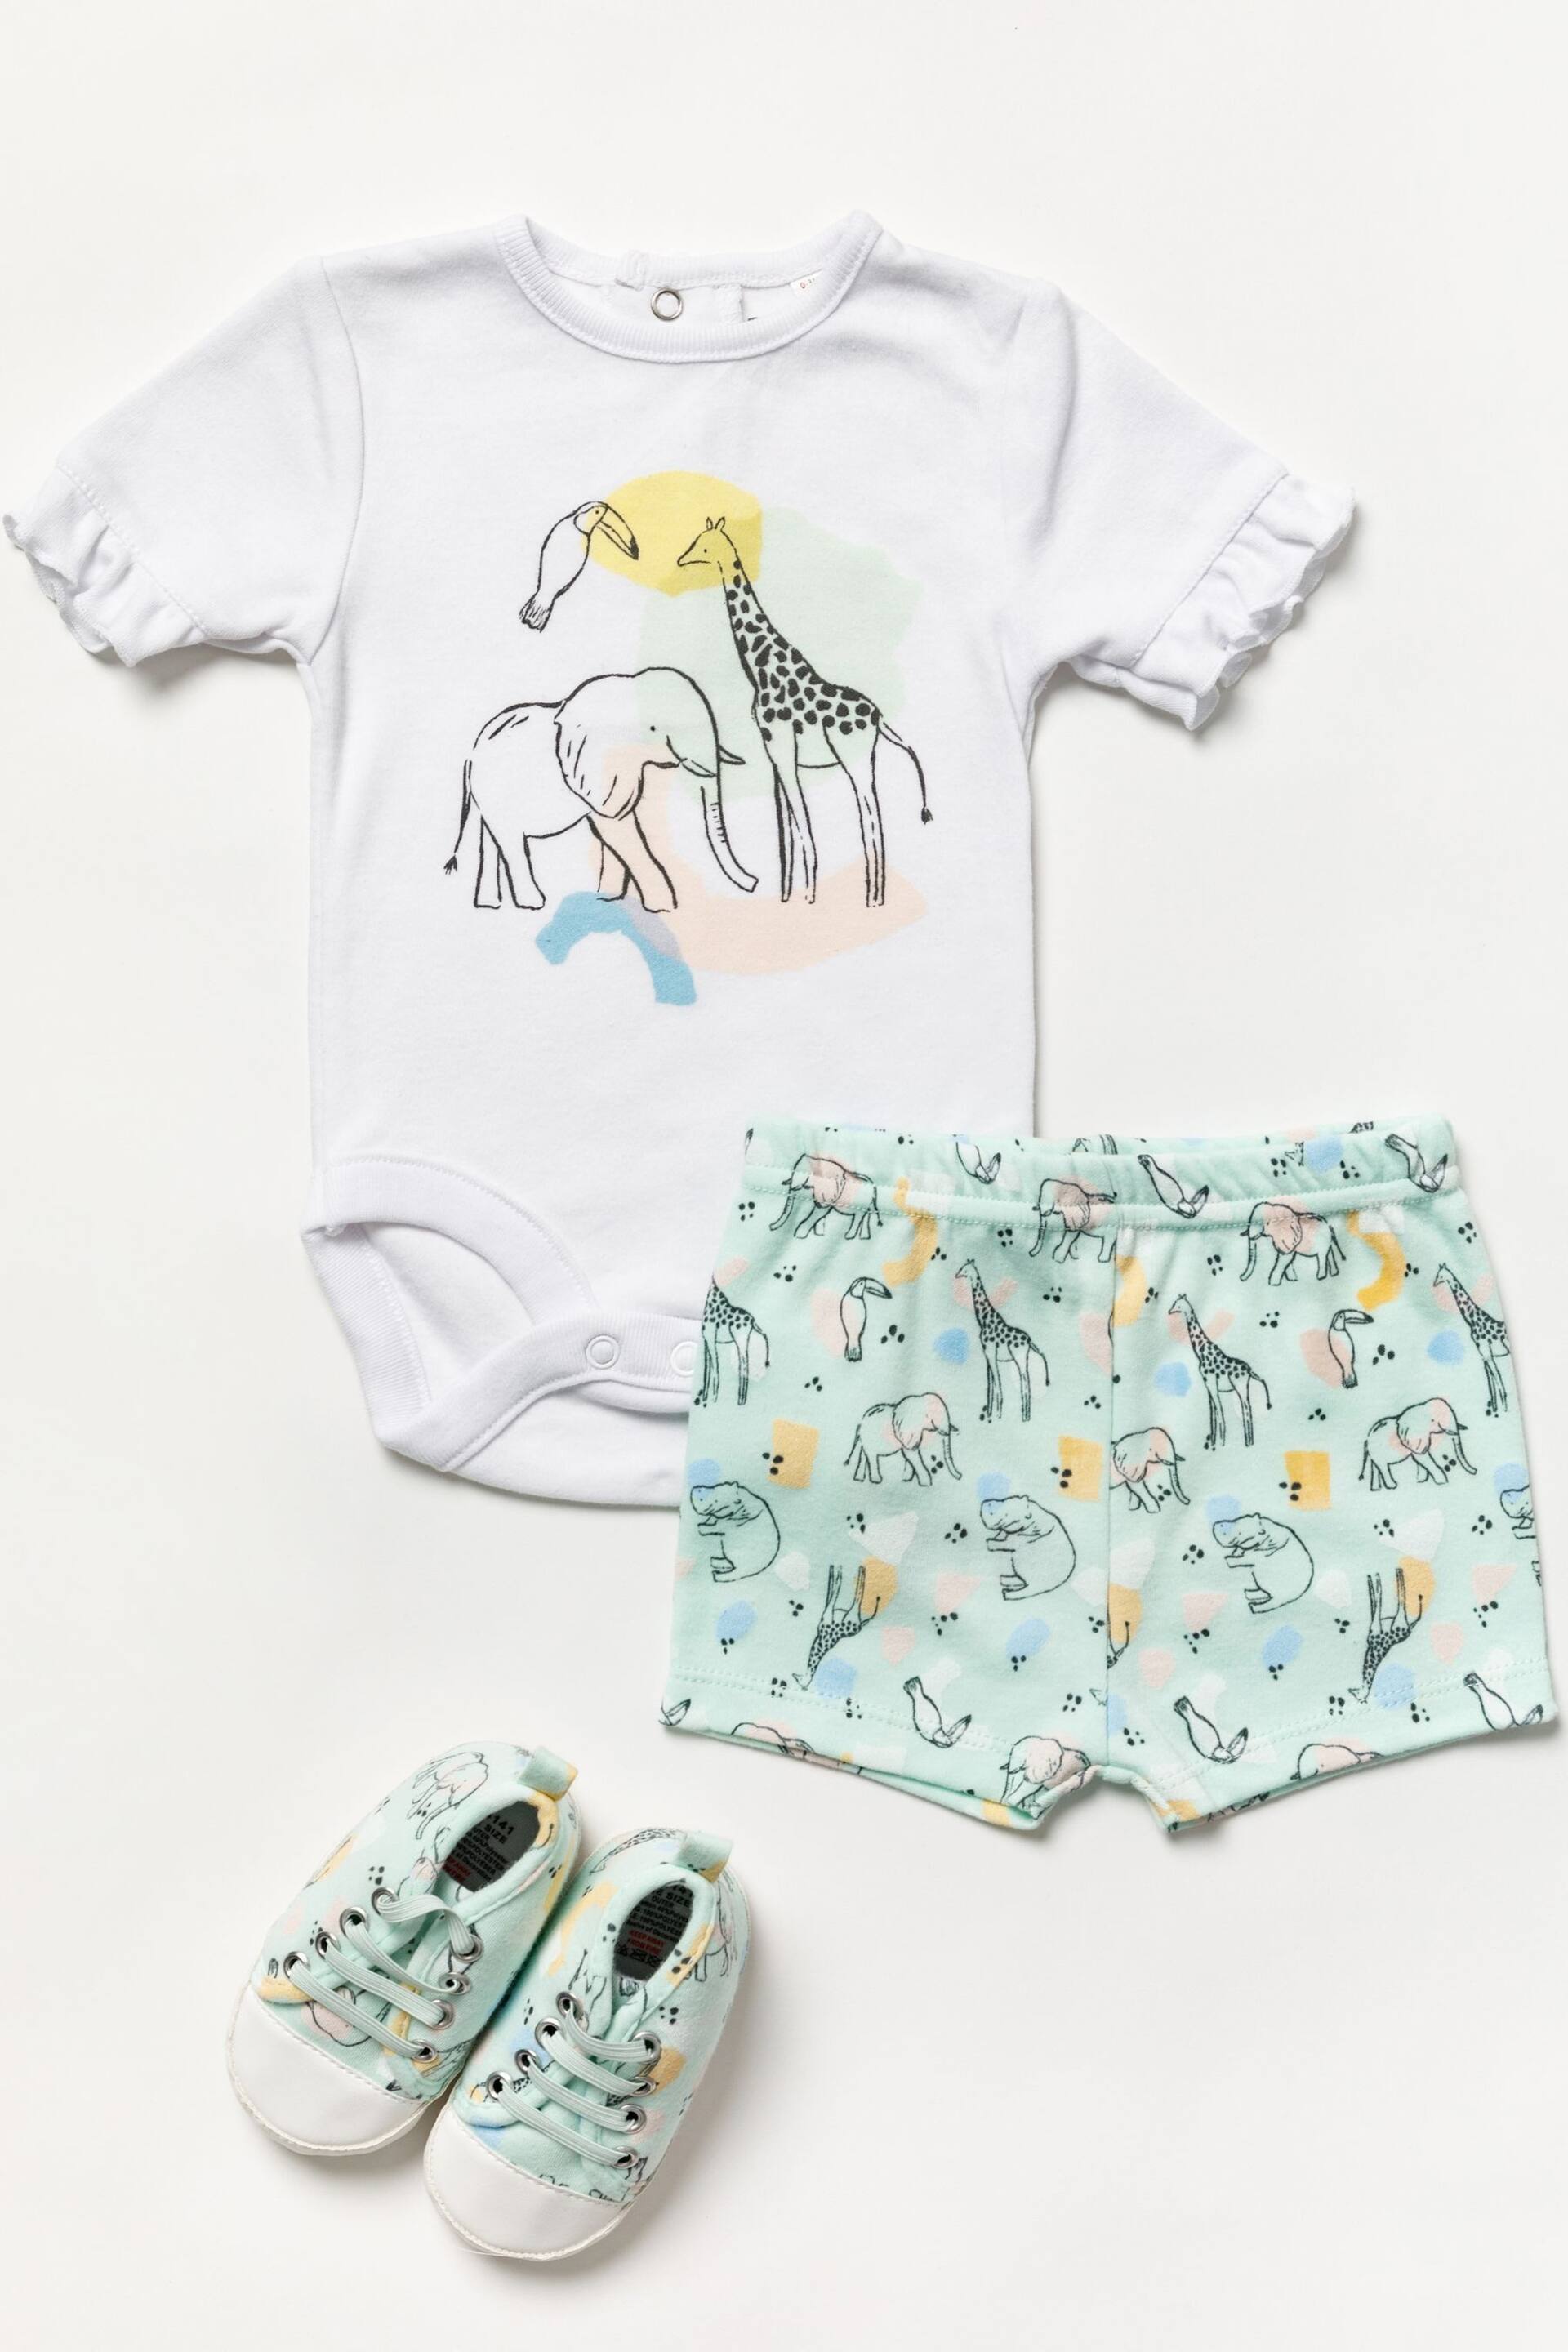 Lily & Jack Blue Bodysuit/Shorts and Shoes Outfit Set - Image 1 of 4